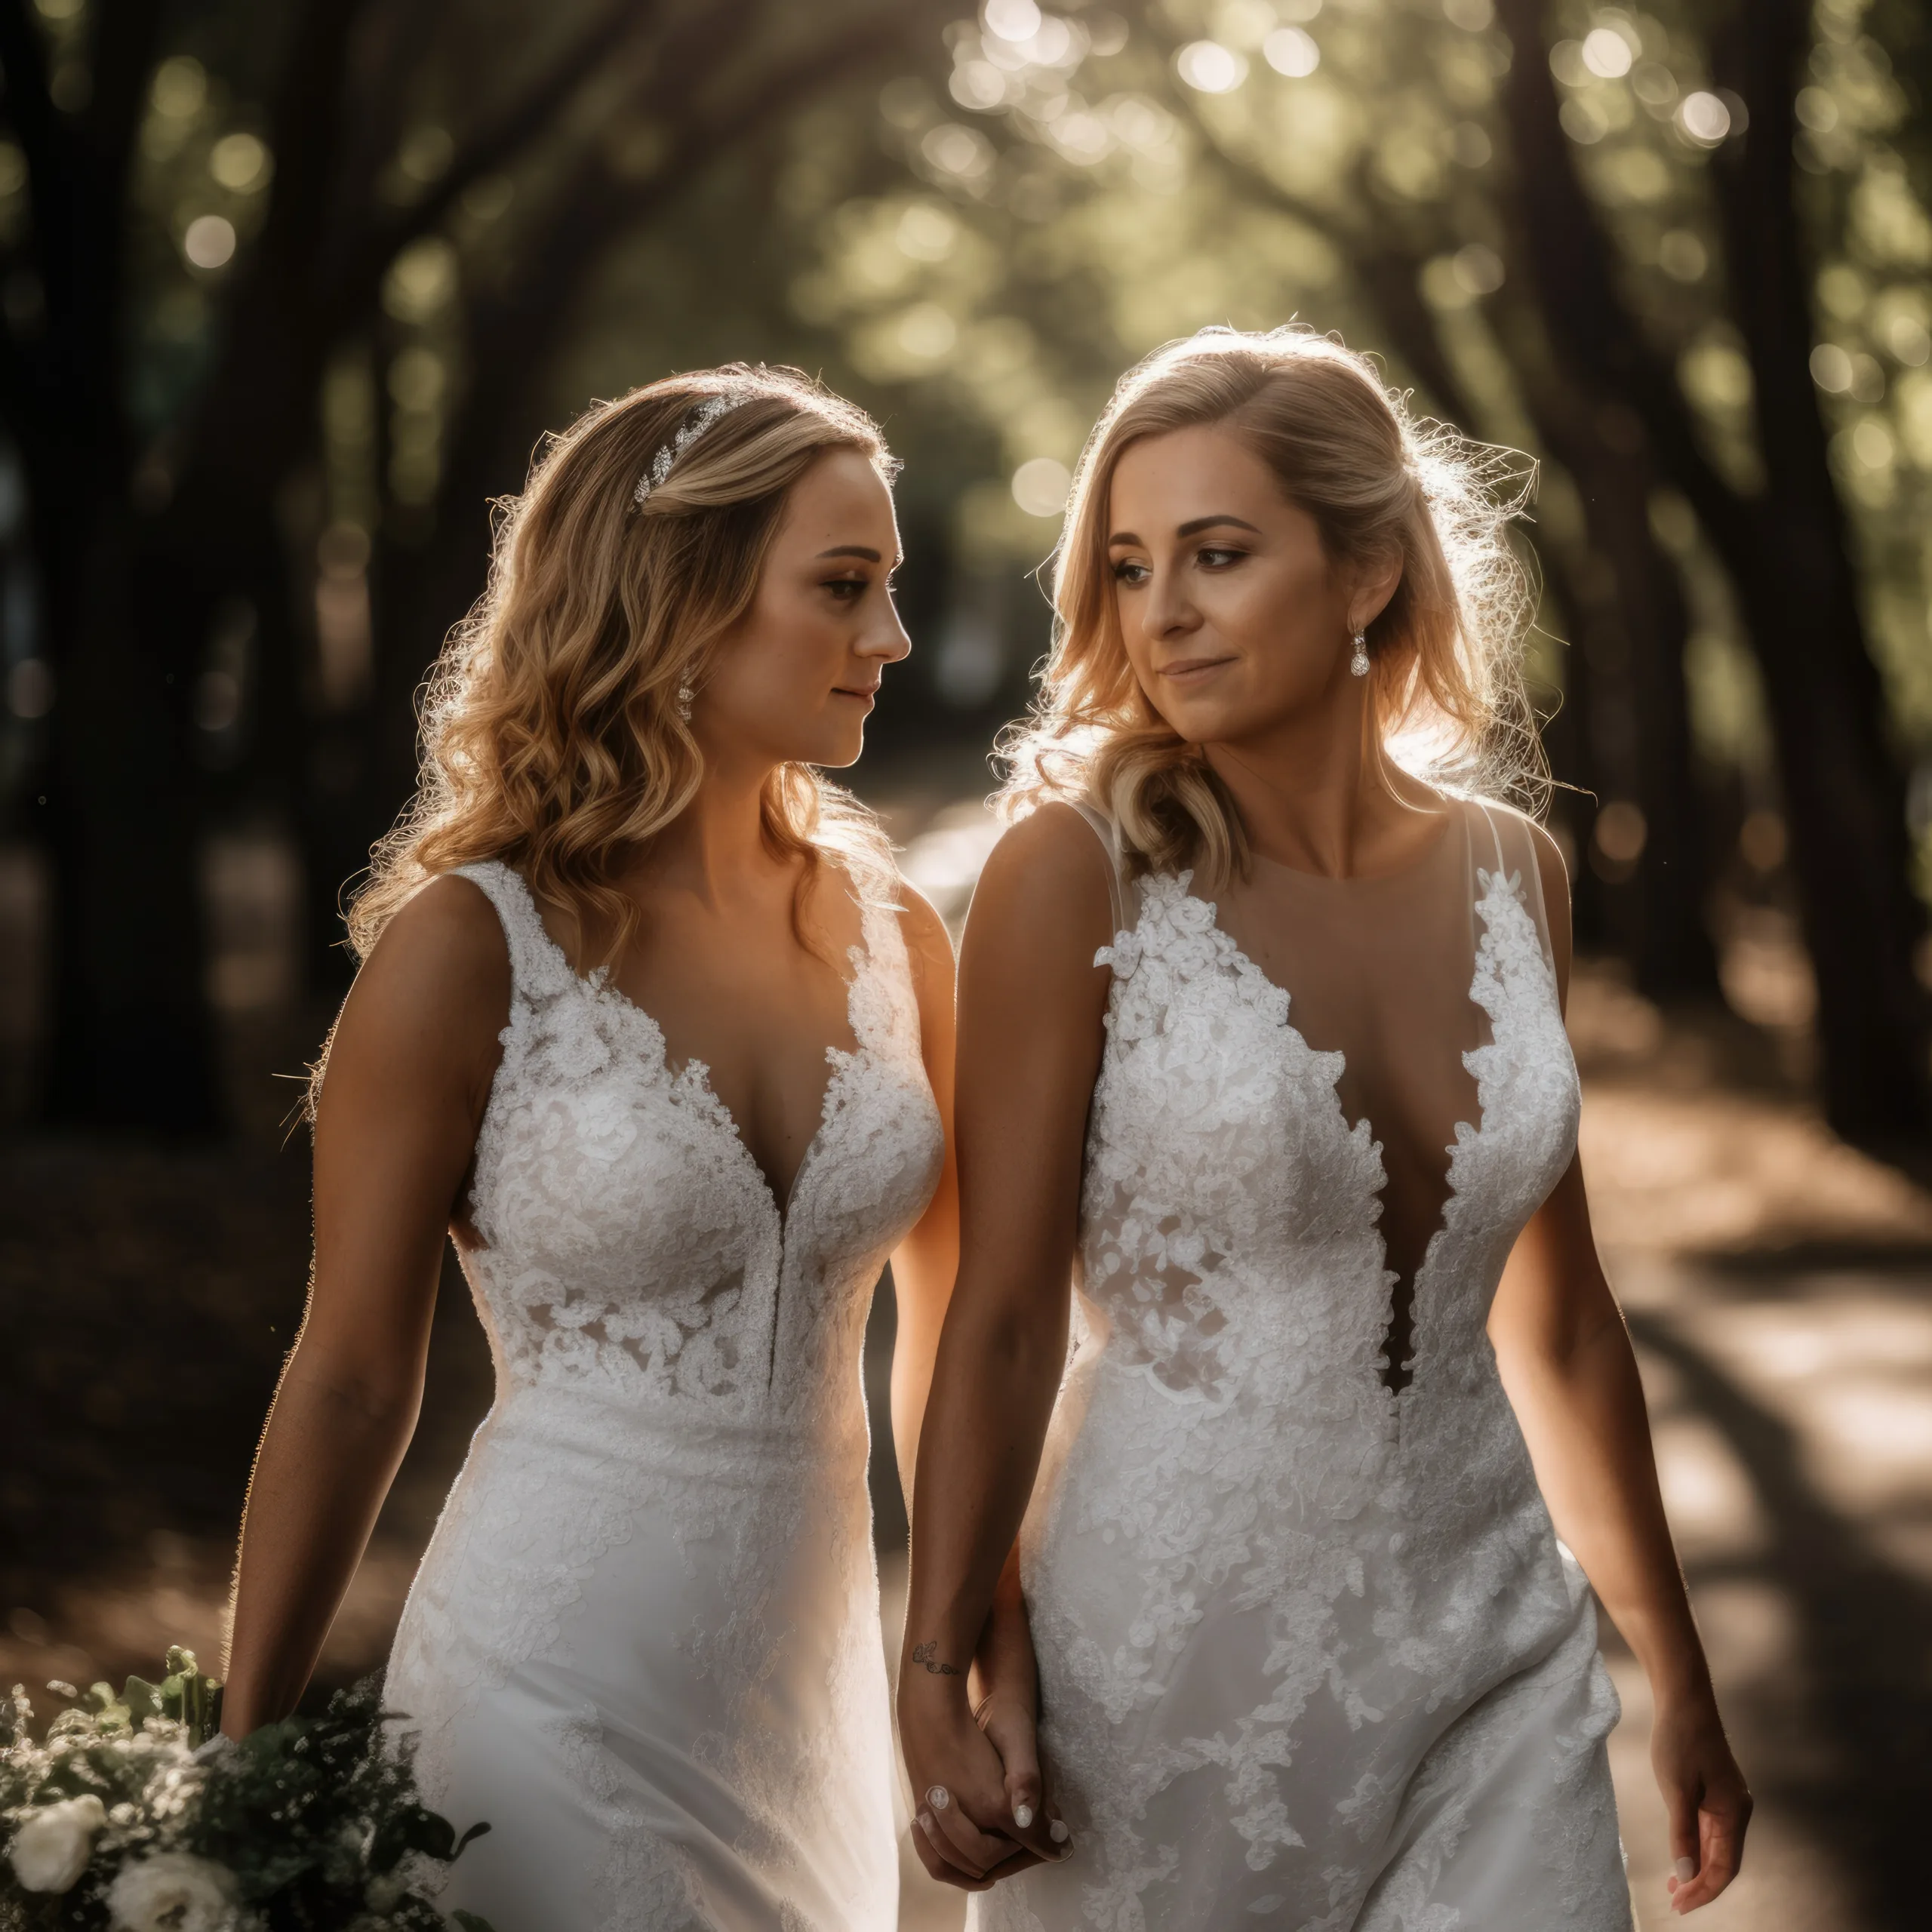 Book a pro for your wedding photos: two beautiful women in white dresses holding hands.